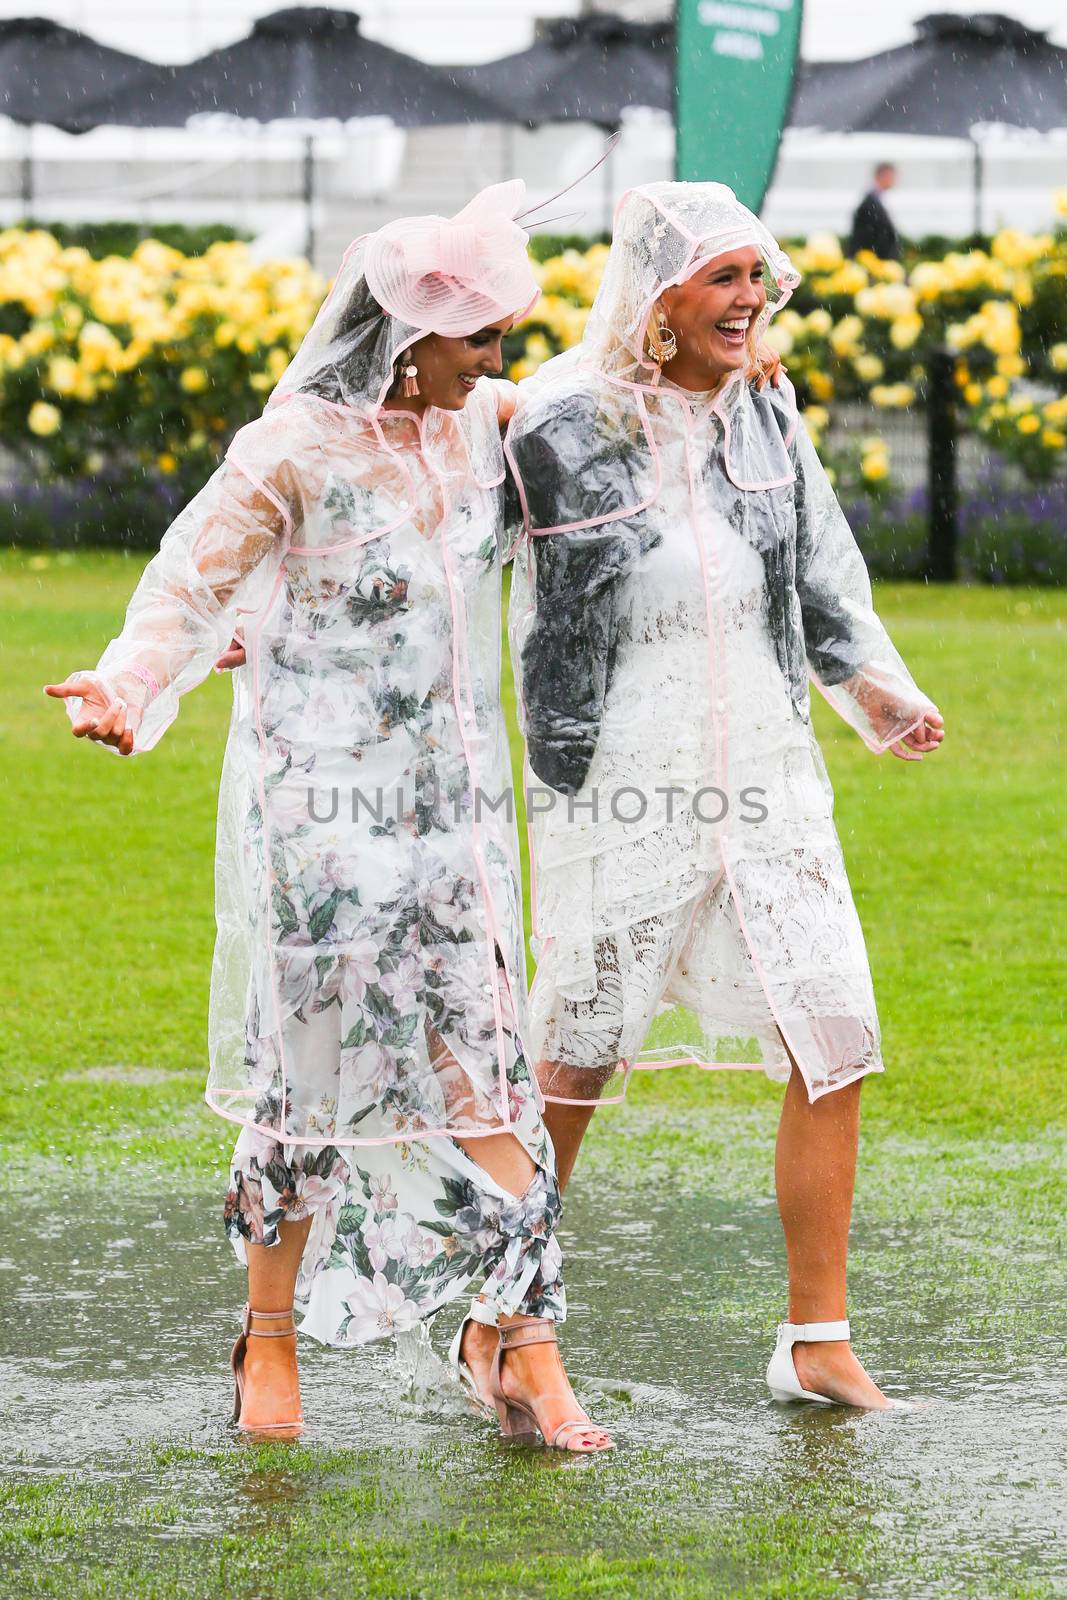 MELBOURNE, AUSTRALIA - NOVEMBER 6: Guests braving the rain on Lexus Melbourne Cup Day at the 2018 Melbourne Cup Carnival